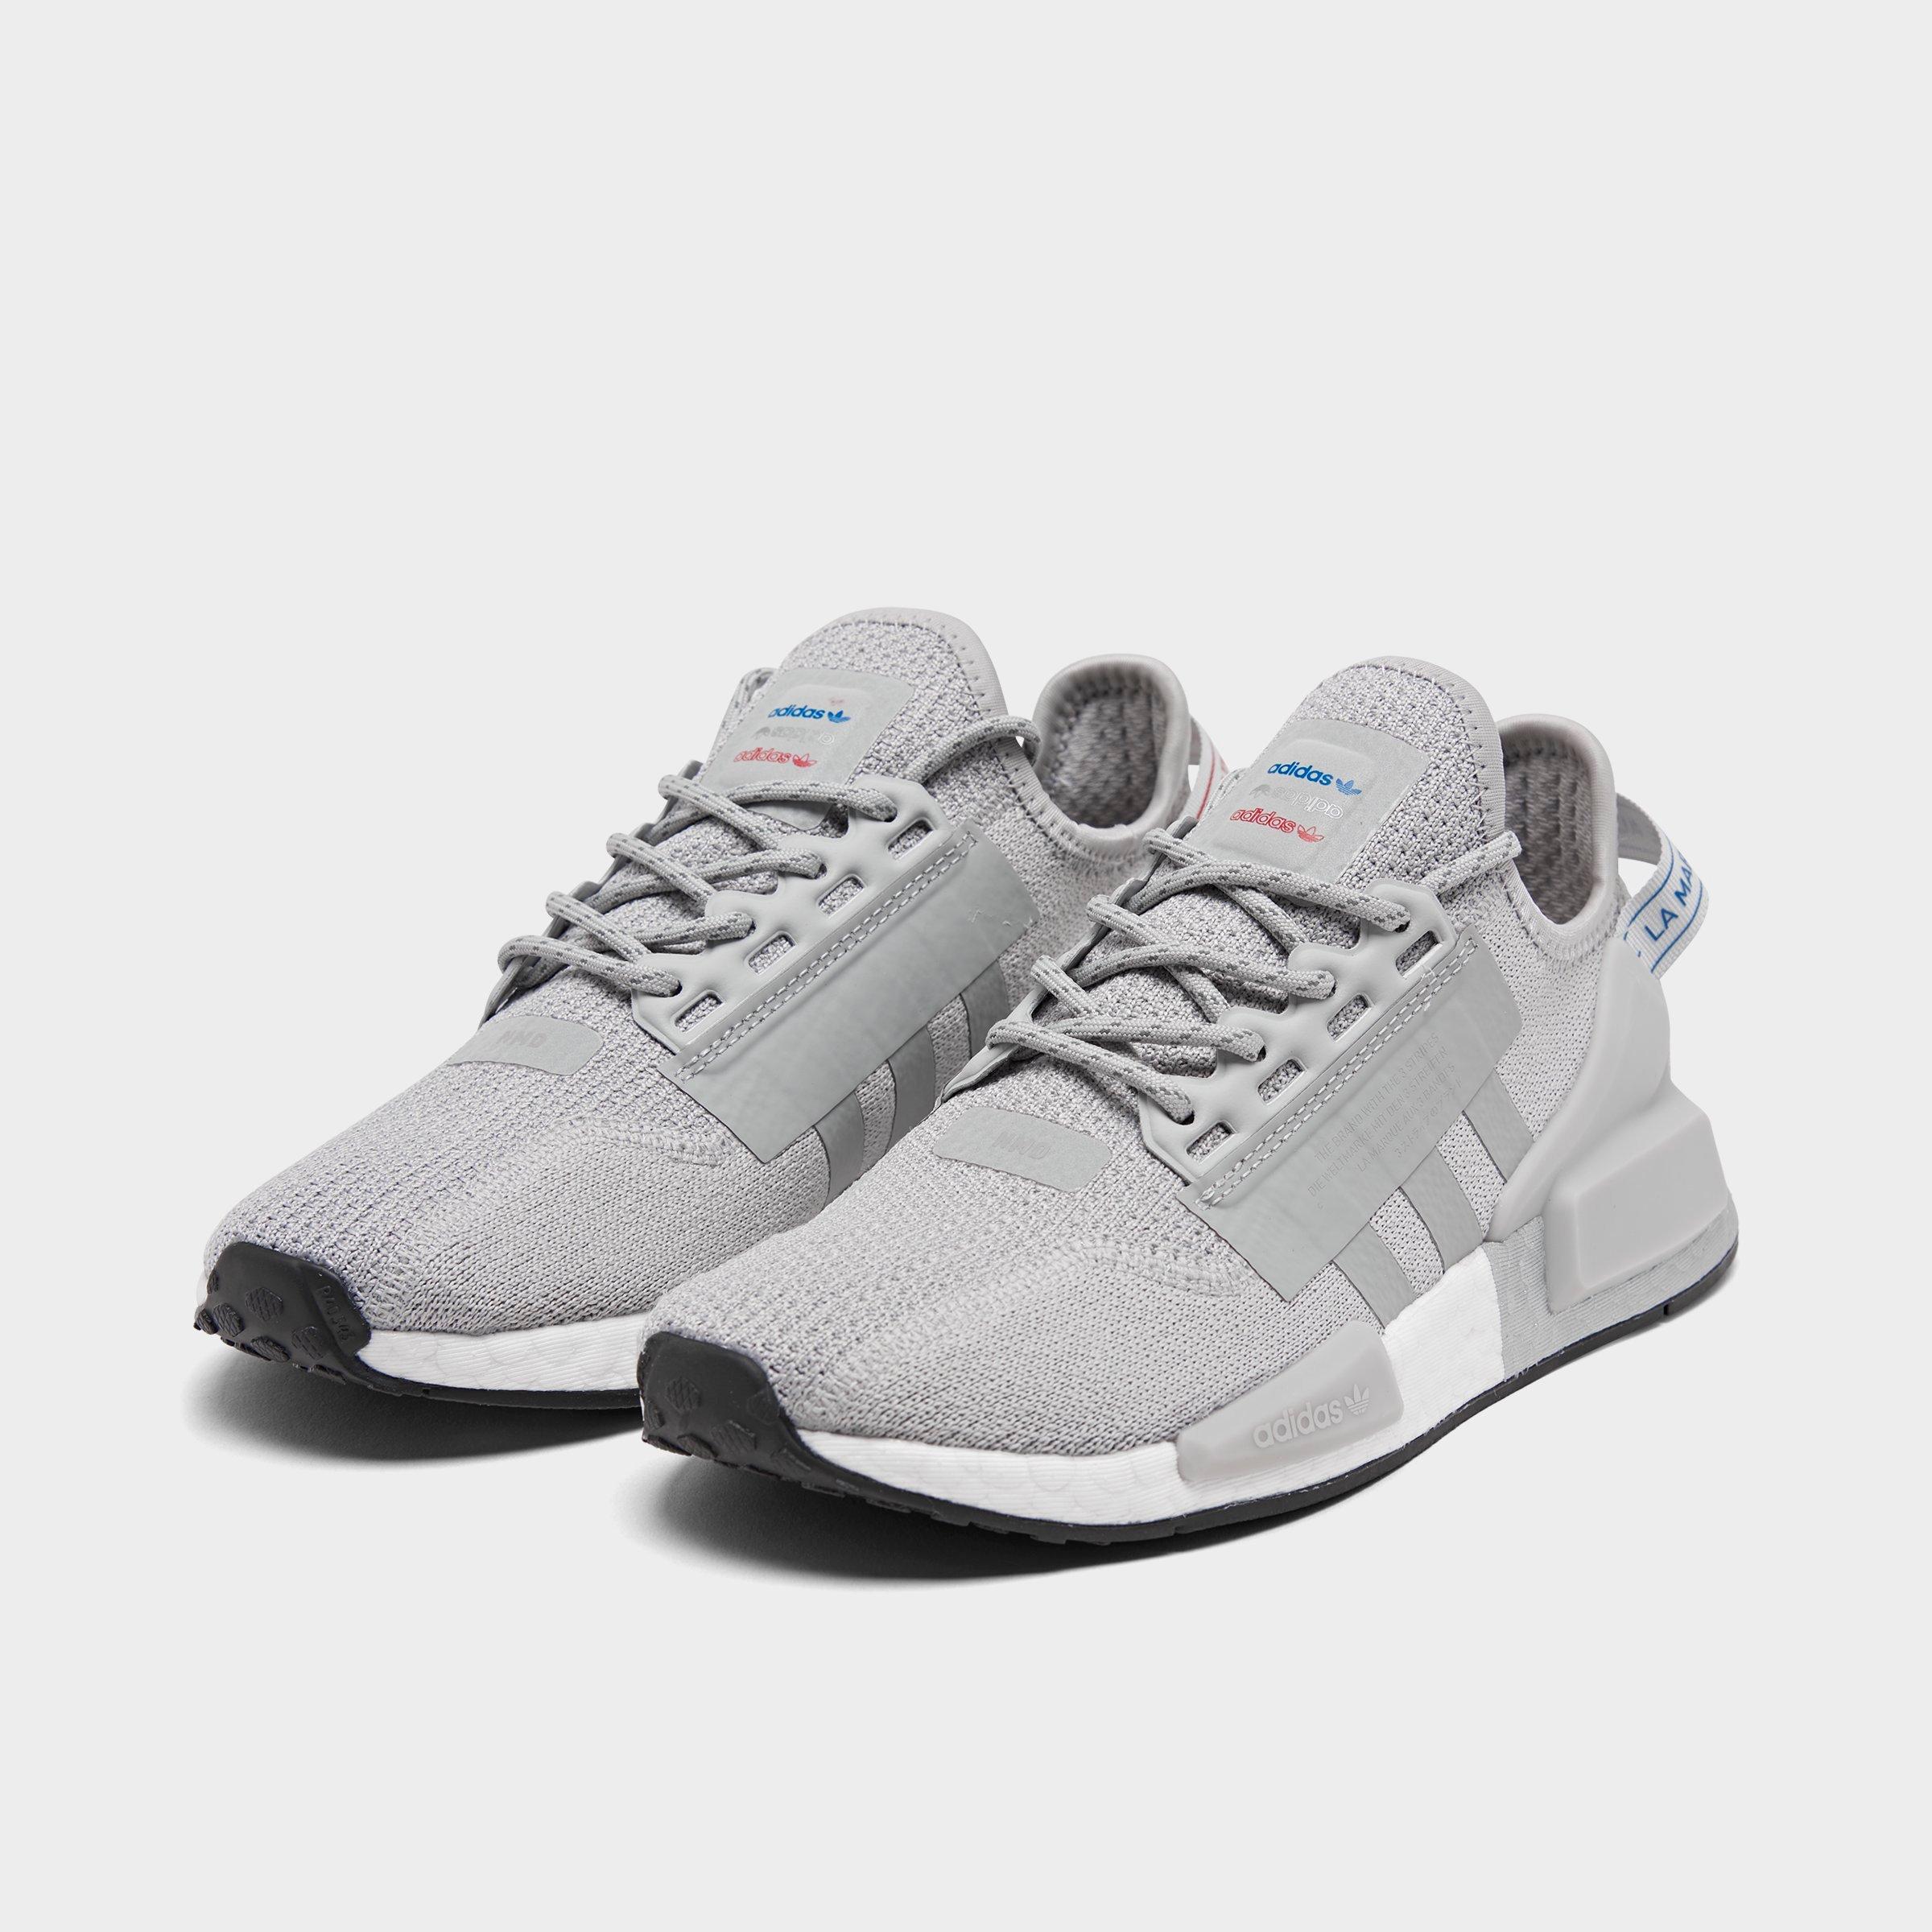 Gray NMD R1 Colorful Boost Shoes adidas us